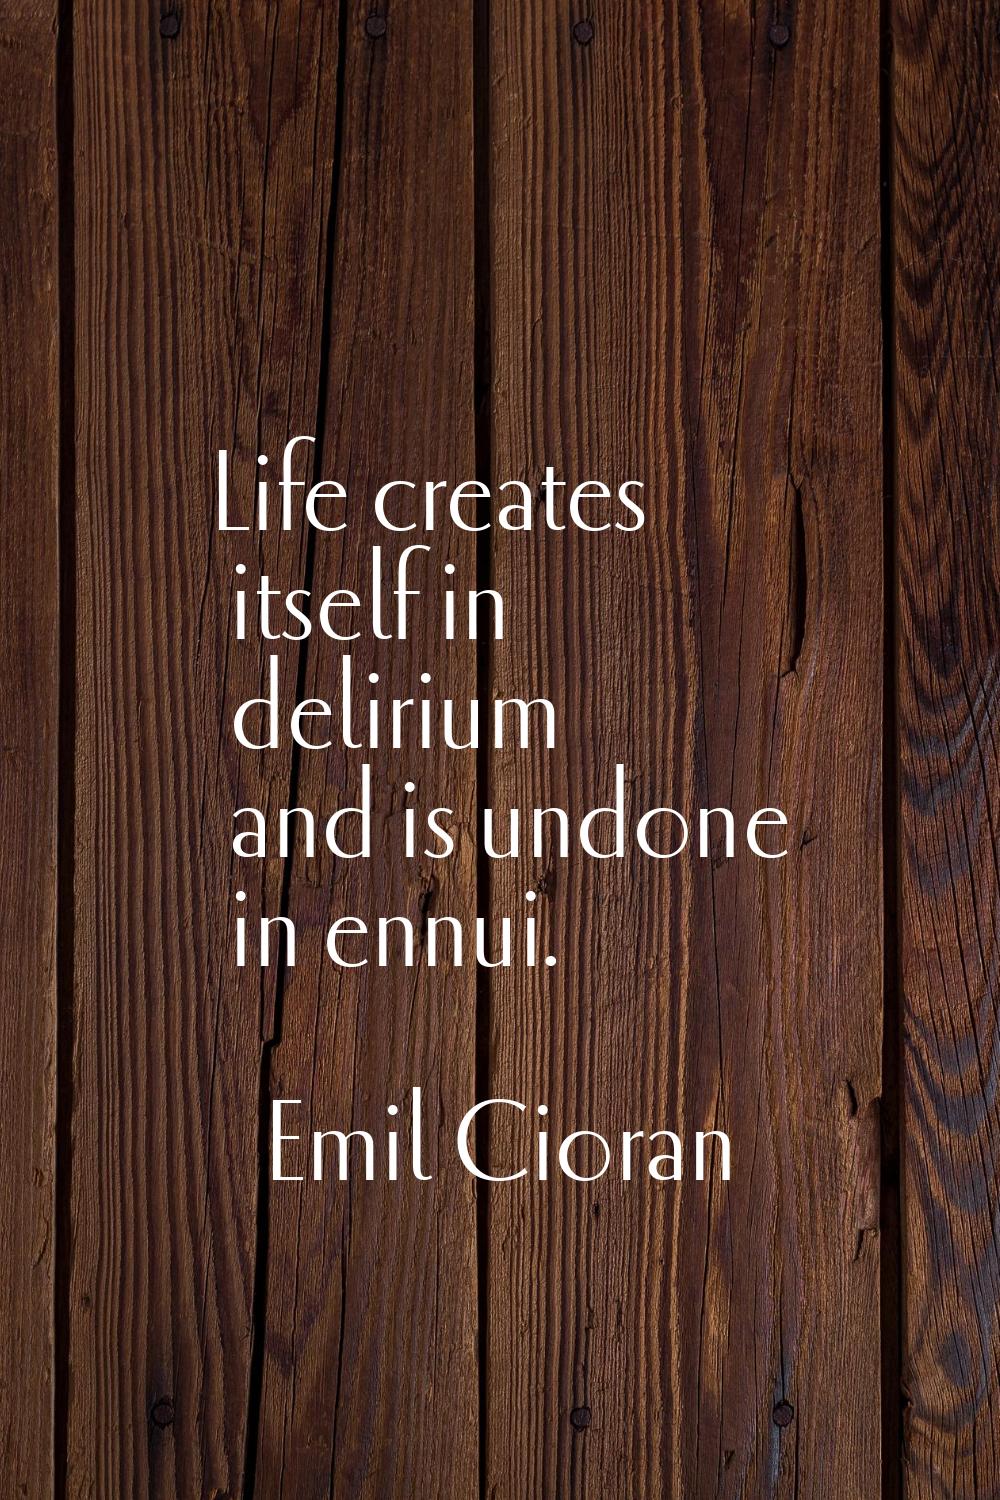 Life creates itself in delirium and is undone in ennui.